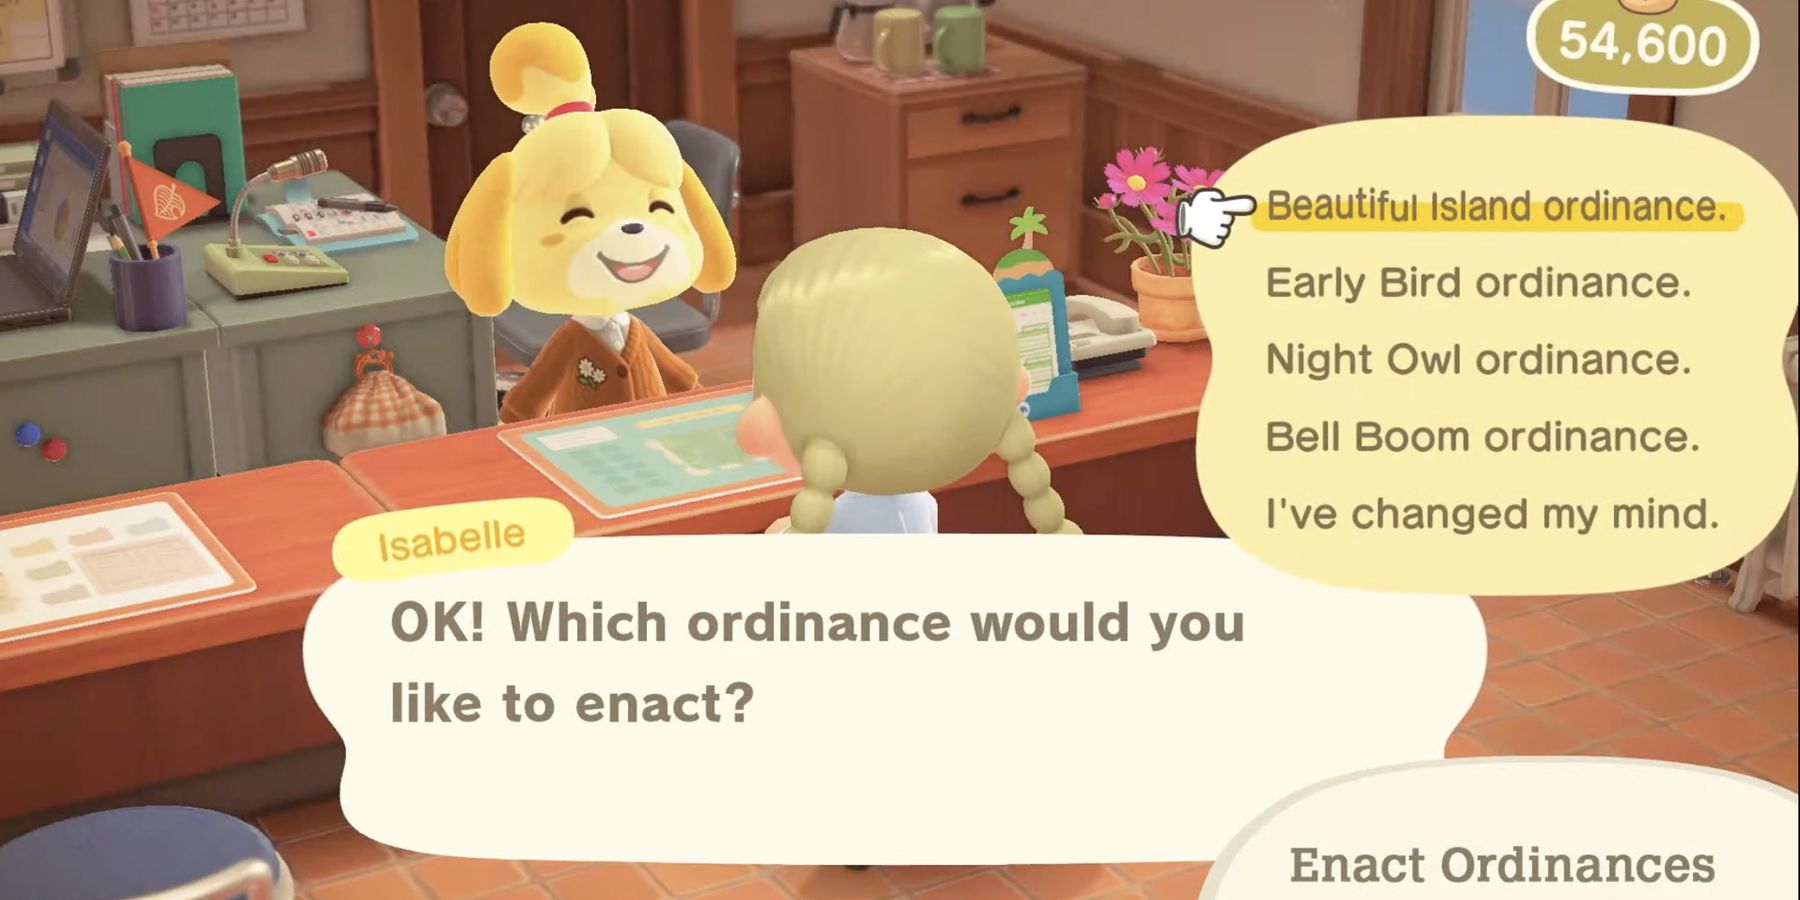 A player gets ready to enact an Island Ordinance while talking to Isabelle in Animal Crossing: New Horizons.